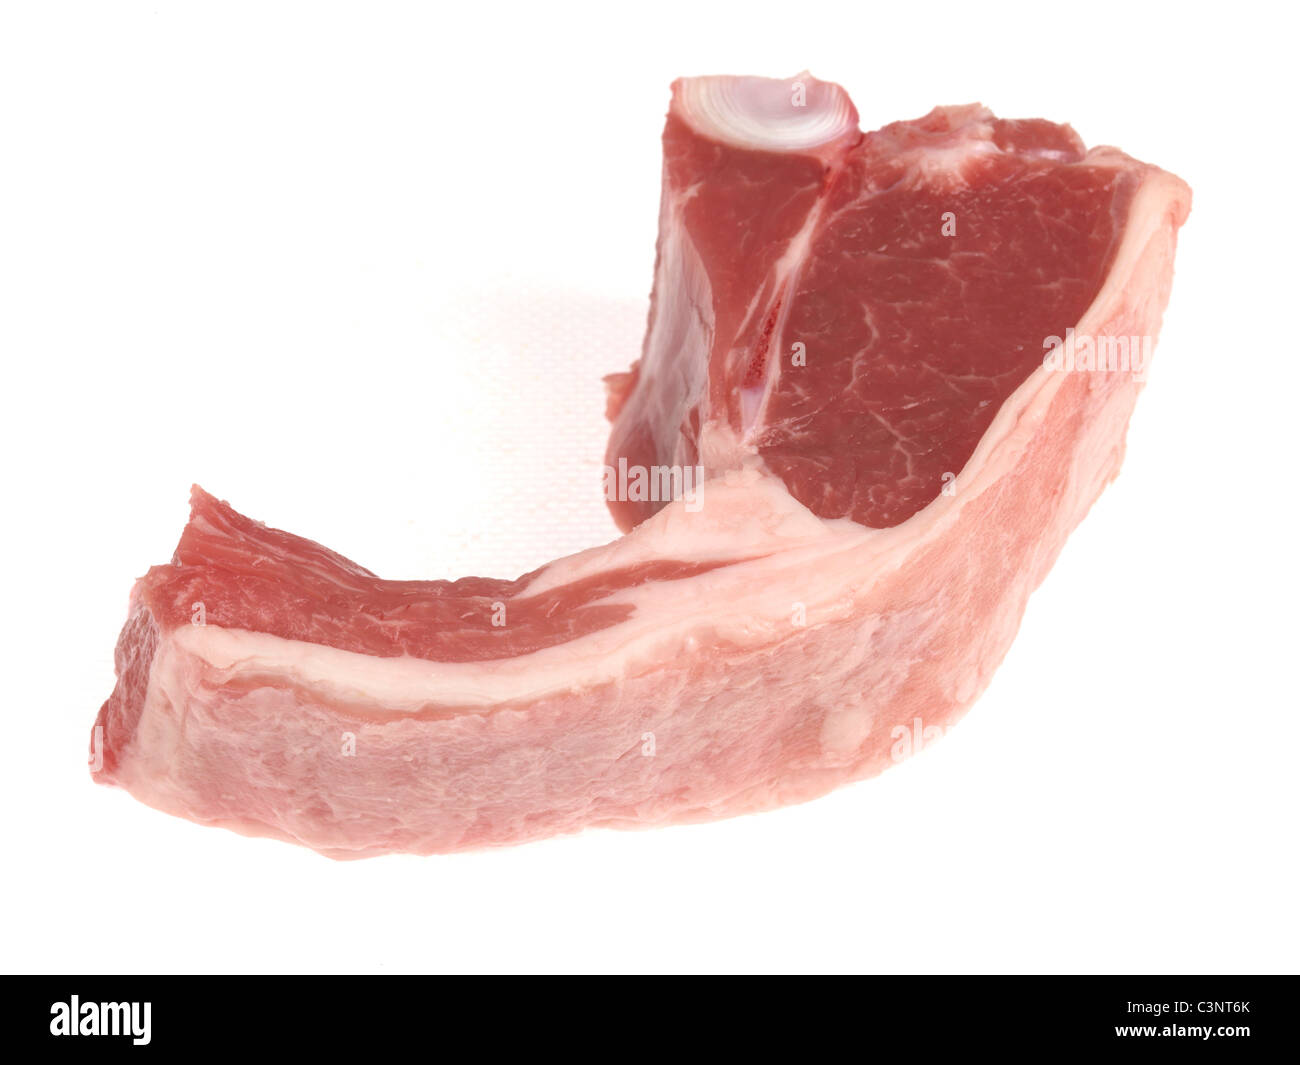 Fresh Uncooked Single Lamb Chop Against a White Background With No People And Copy Space Stock Photo